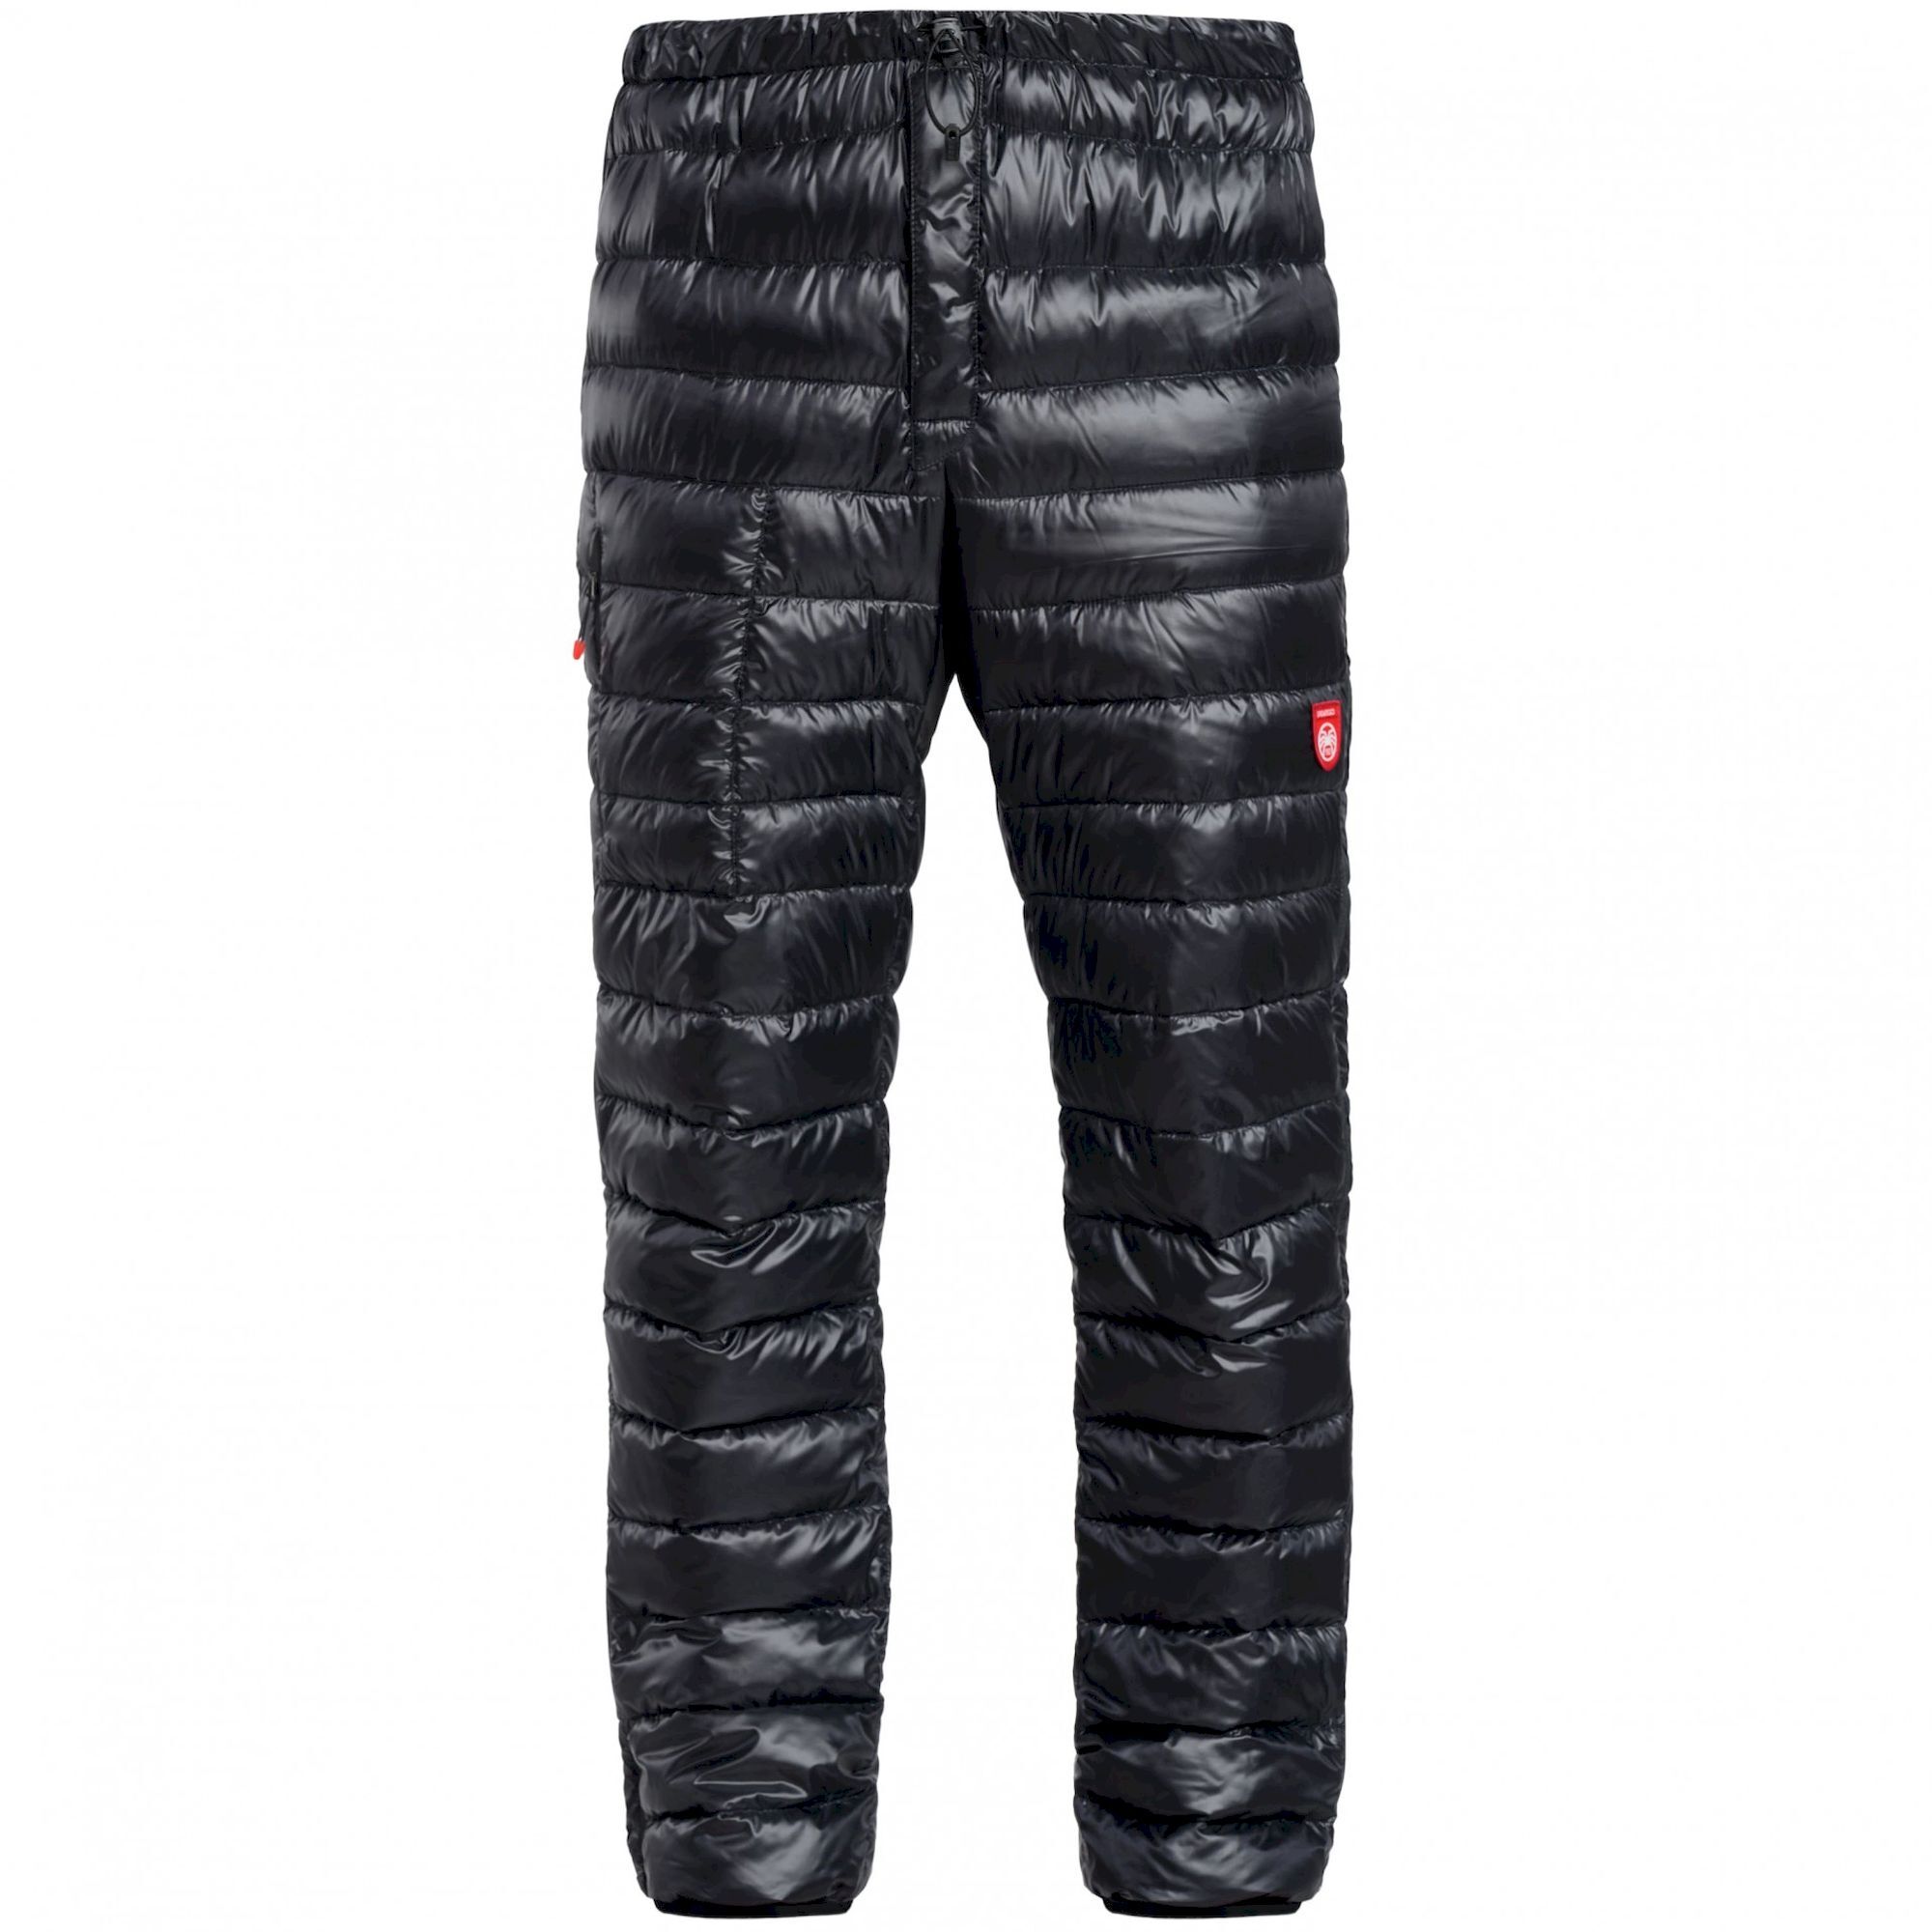 Pajak Ghost Pants - Mountaineering trousers